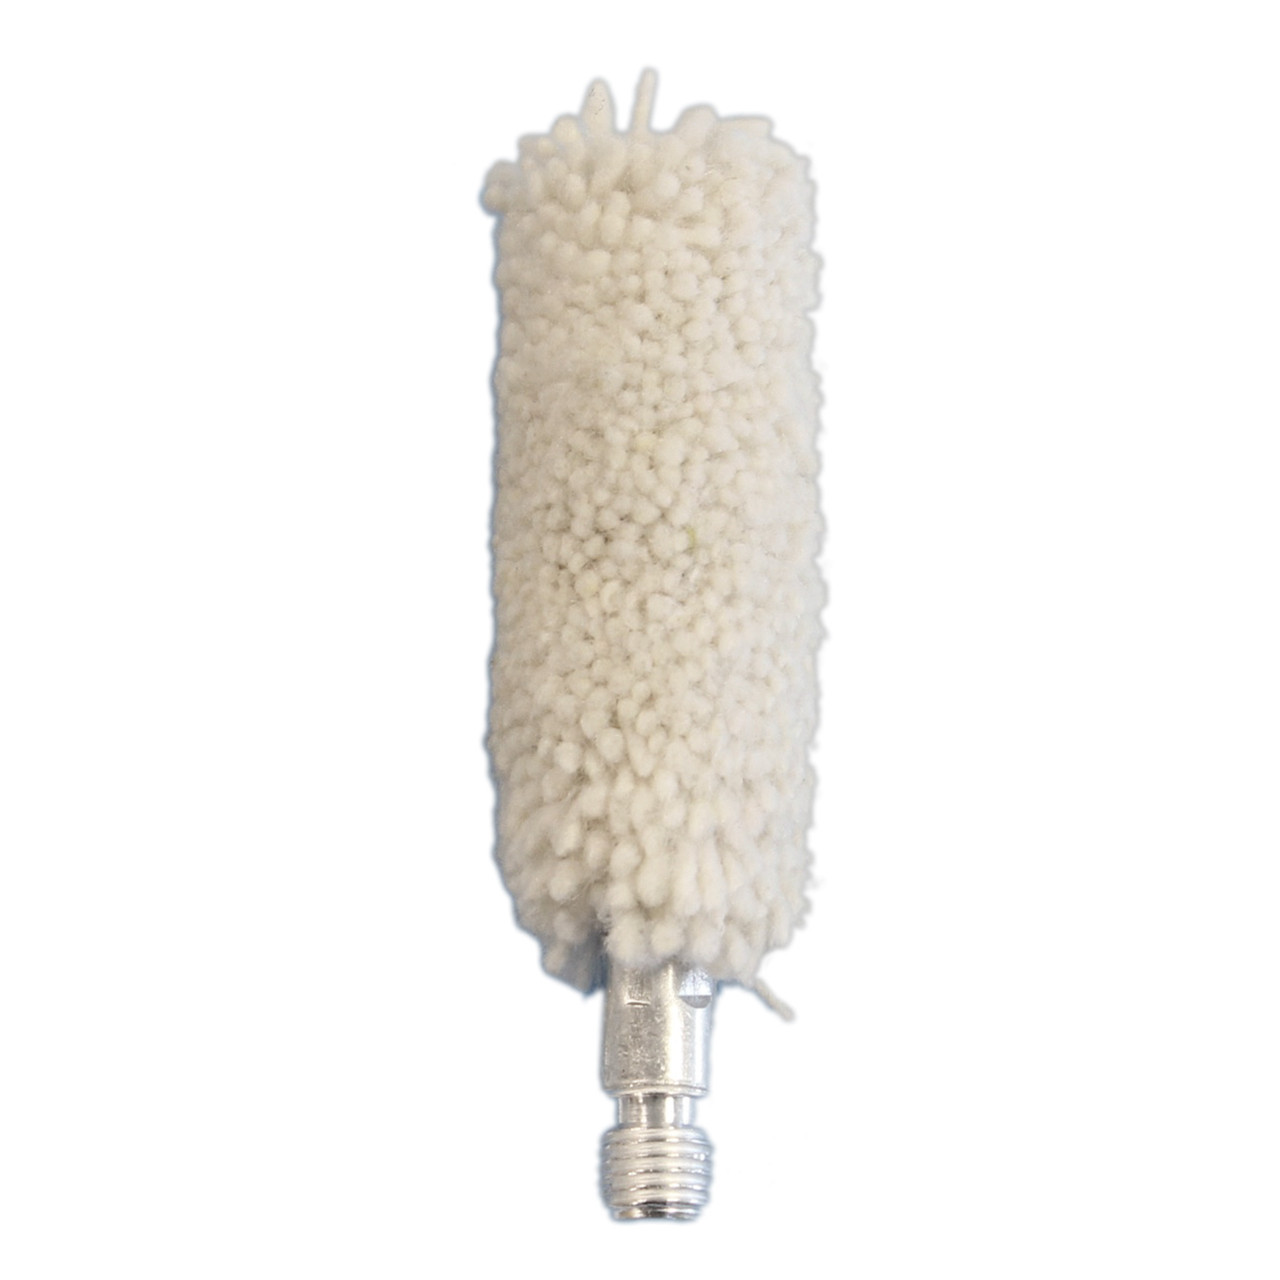 KEY FEATURES

FITS 8-32 THREADS
12 GAUGE MOP
SINGLE PACK MOP
DETAILS

BIRCHWOOD CASEY® GUN CLEANING MOPS ARE MADE FROM HIGH QUALITY COMPONENTS AND ARE EFFECTIVE AT APPLYING SOLVENTS AND LUBRICANTS. *ALWAYS MAKE SURE YOUR FIREARM IS UNLOADED BEFORE CLEANING.

41333- CLEANING MOP 12 GAUGE